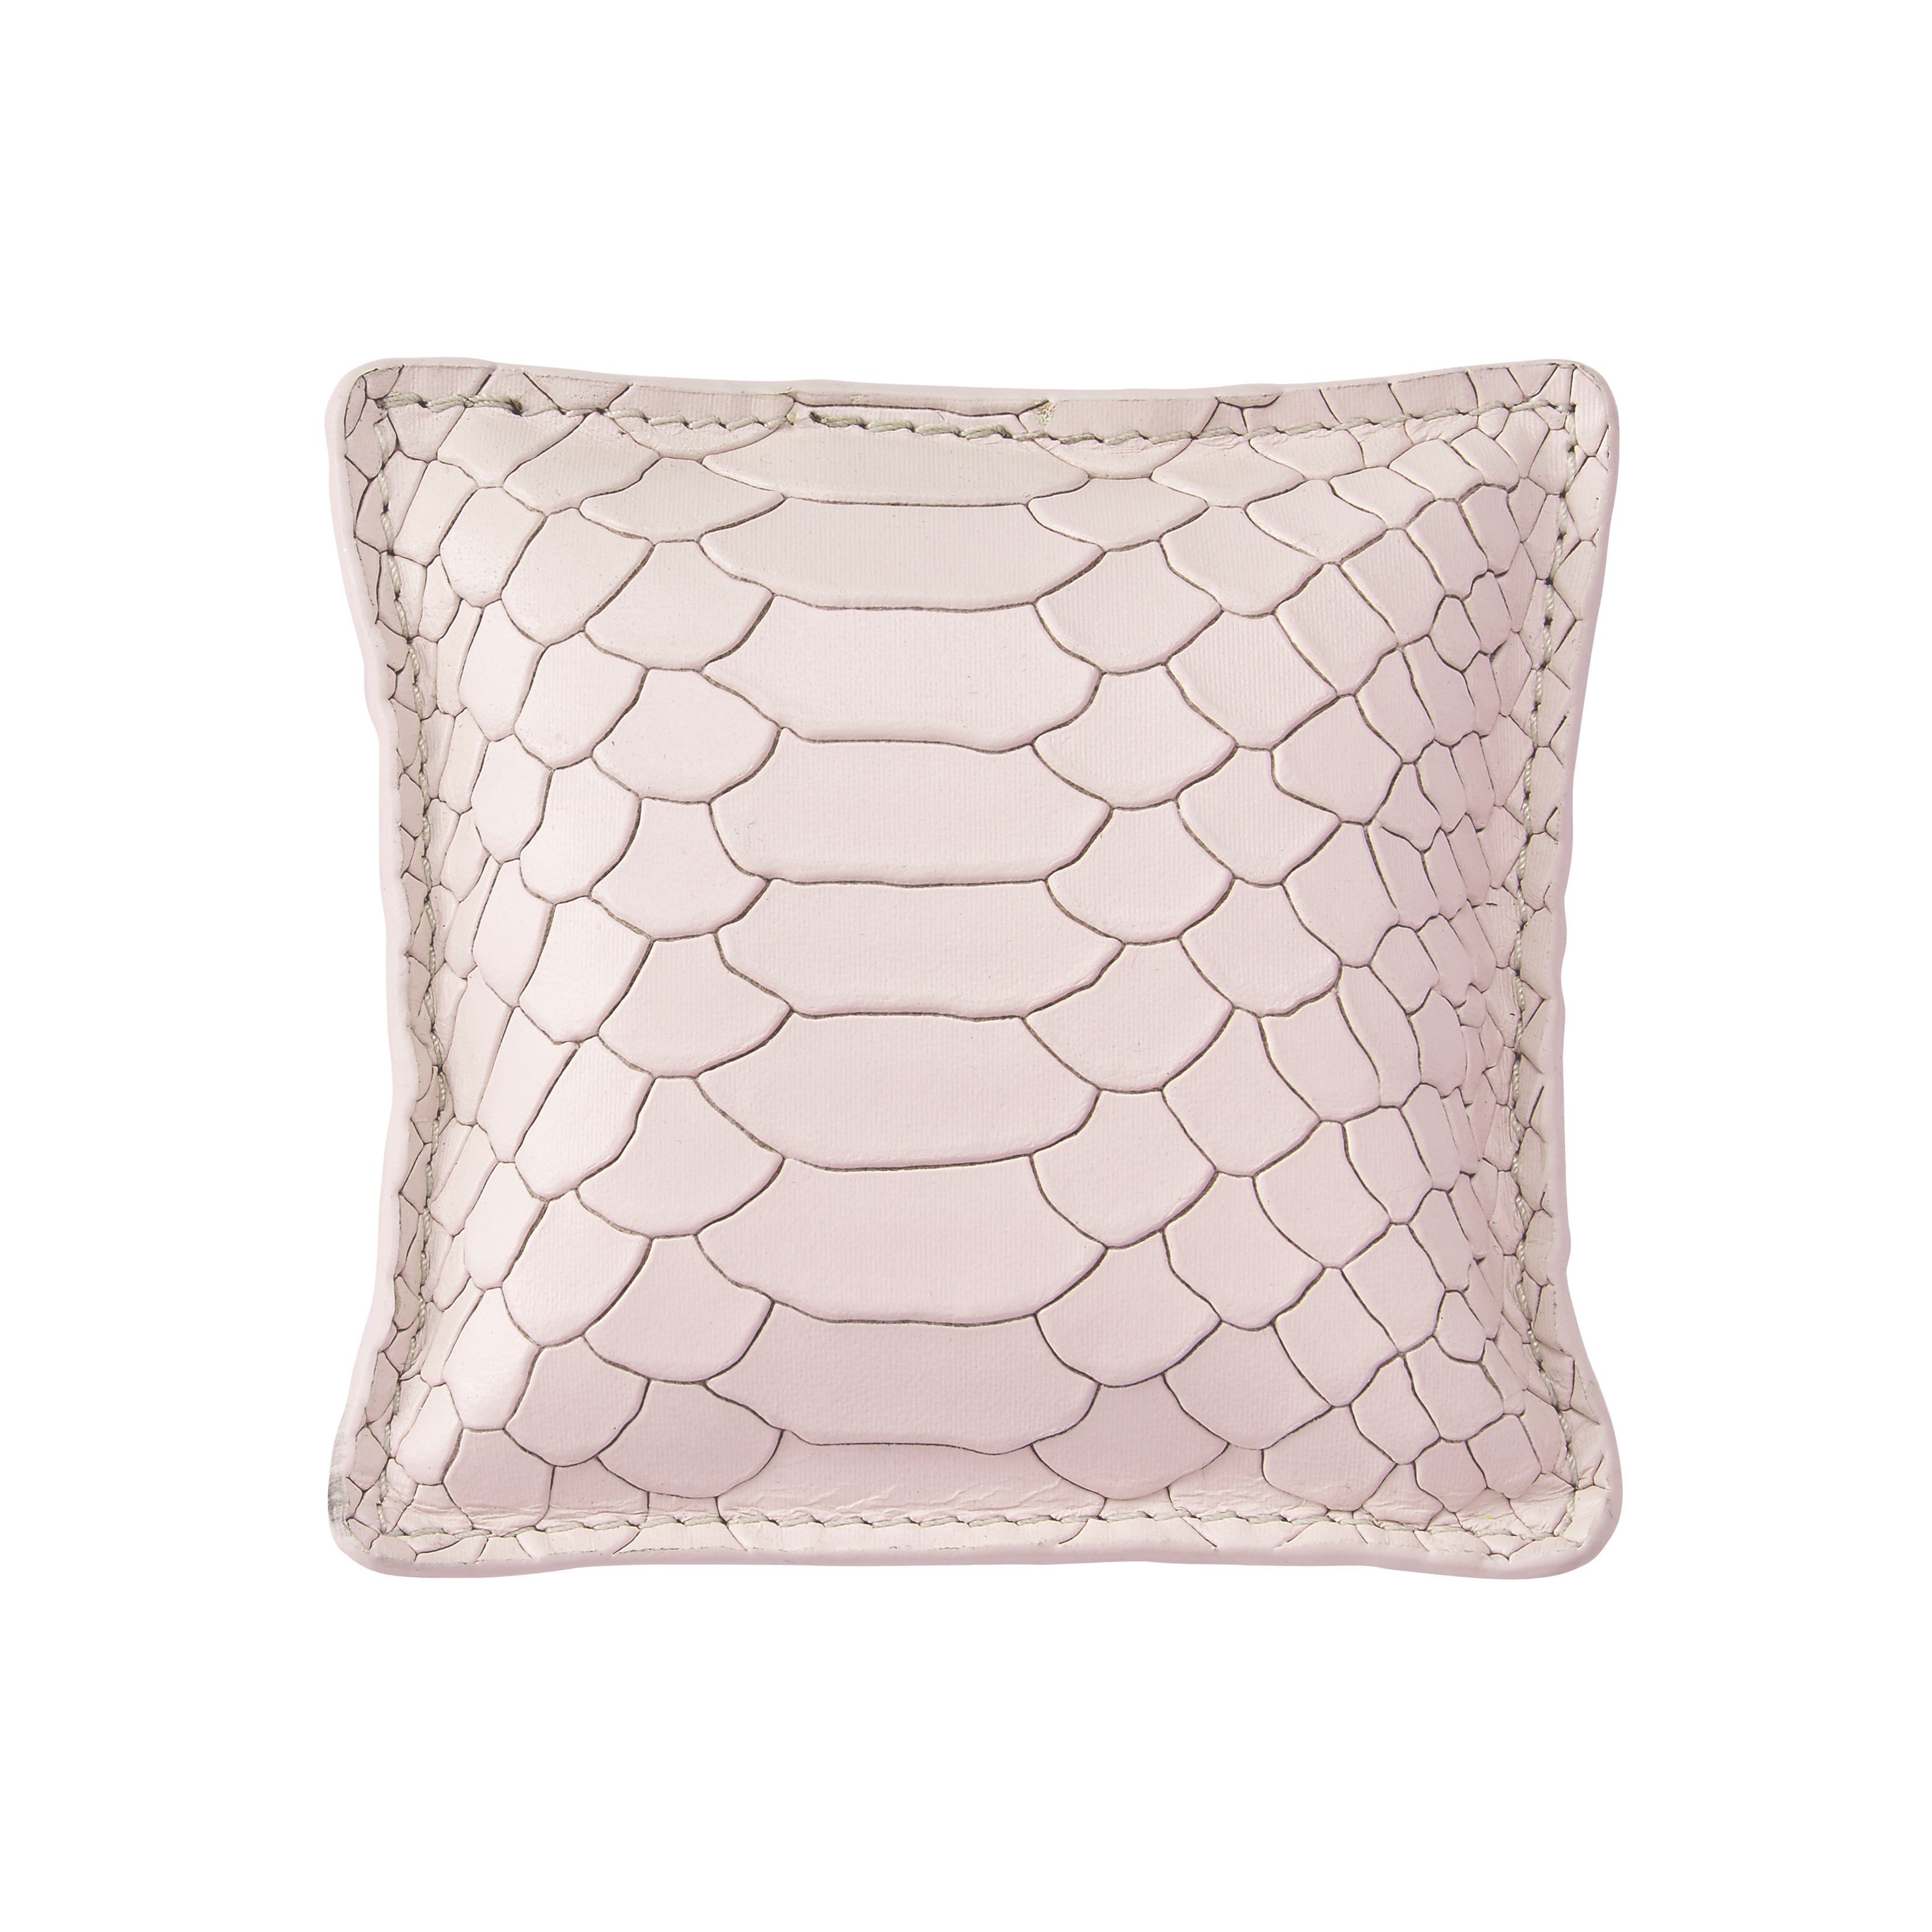 Graphic Image Square Paperweight Petal Pink Embossed Python Leather